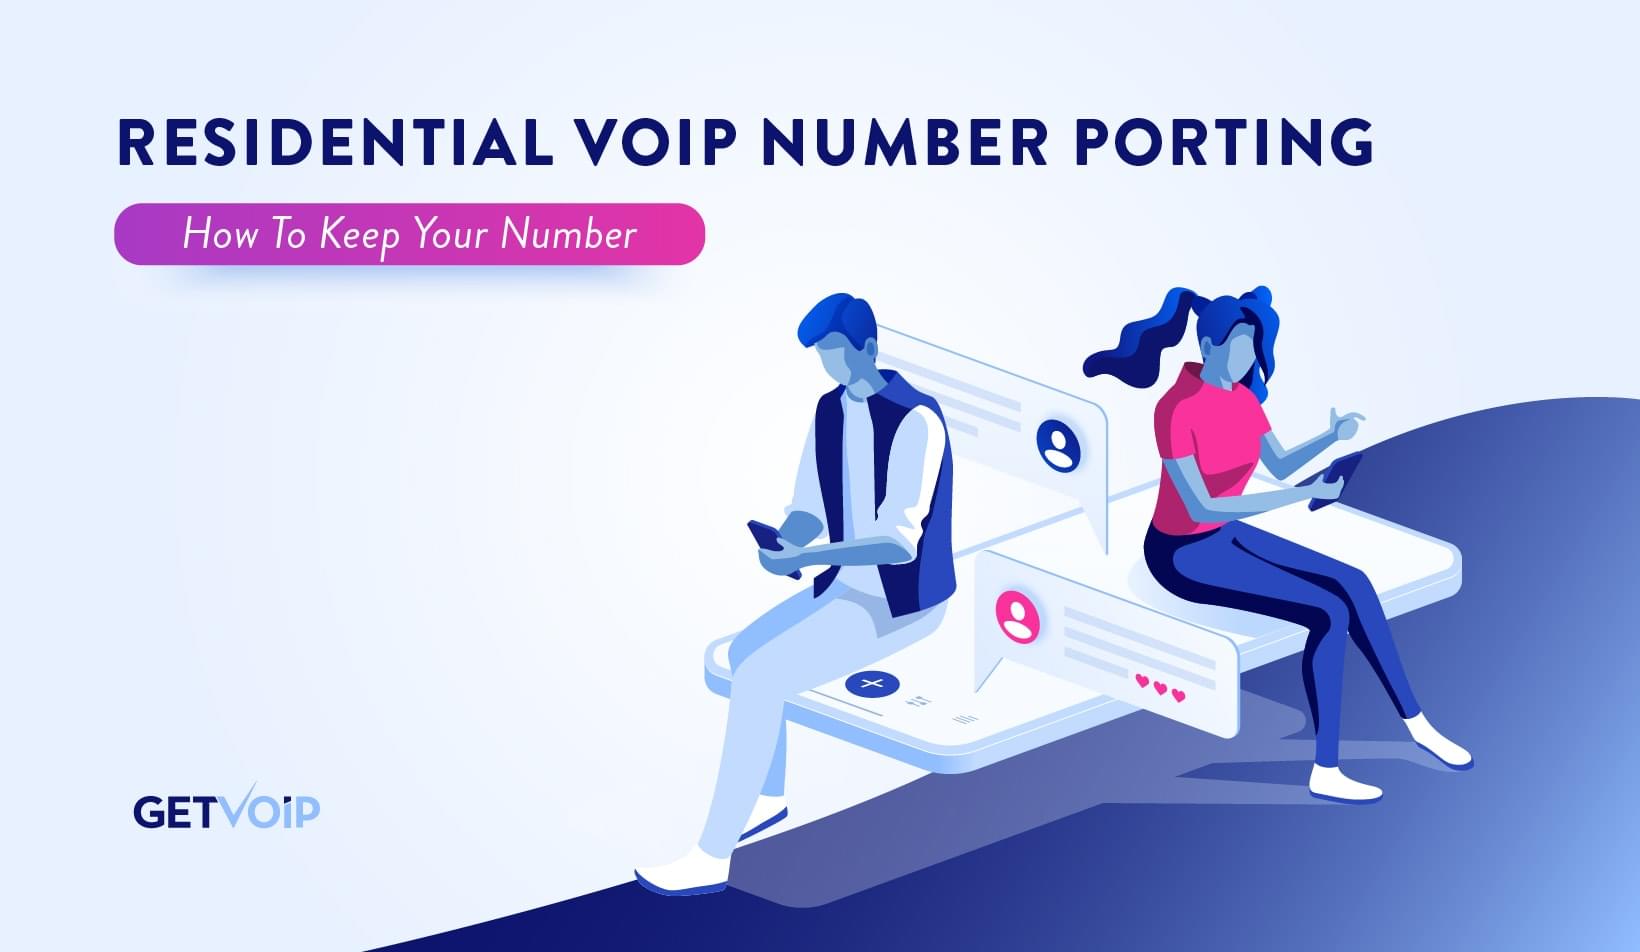 Residential VoIP Number Porting – How To Keep Your Number